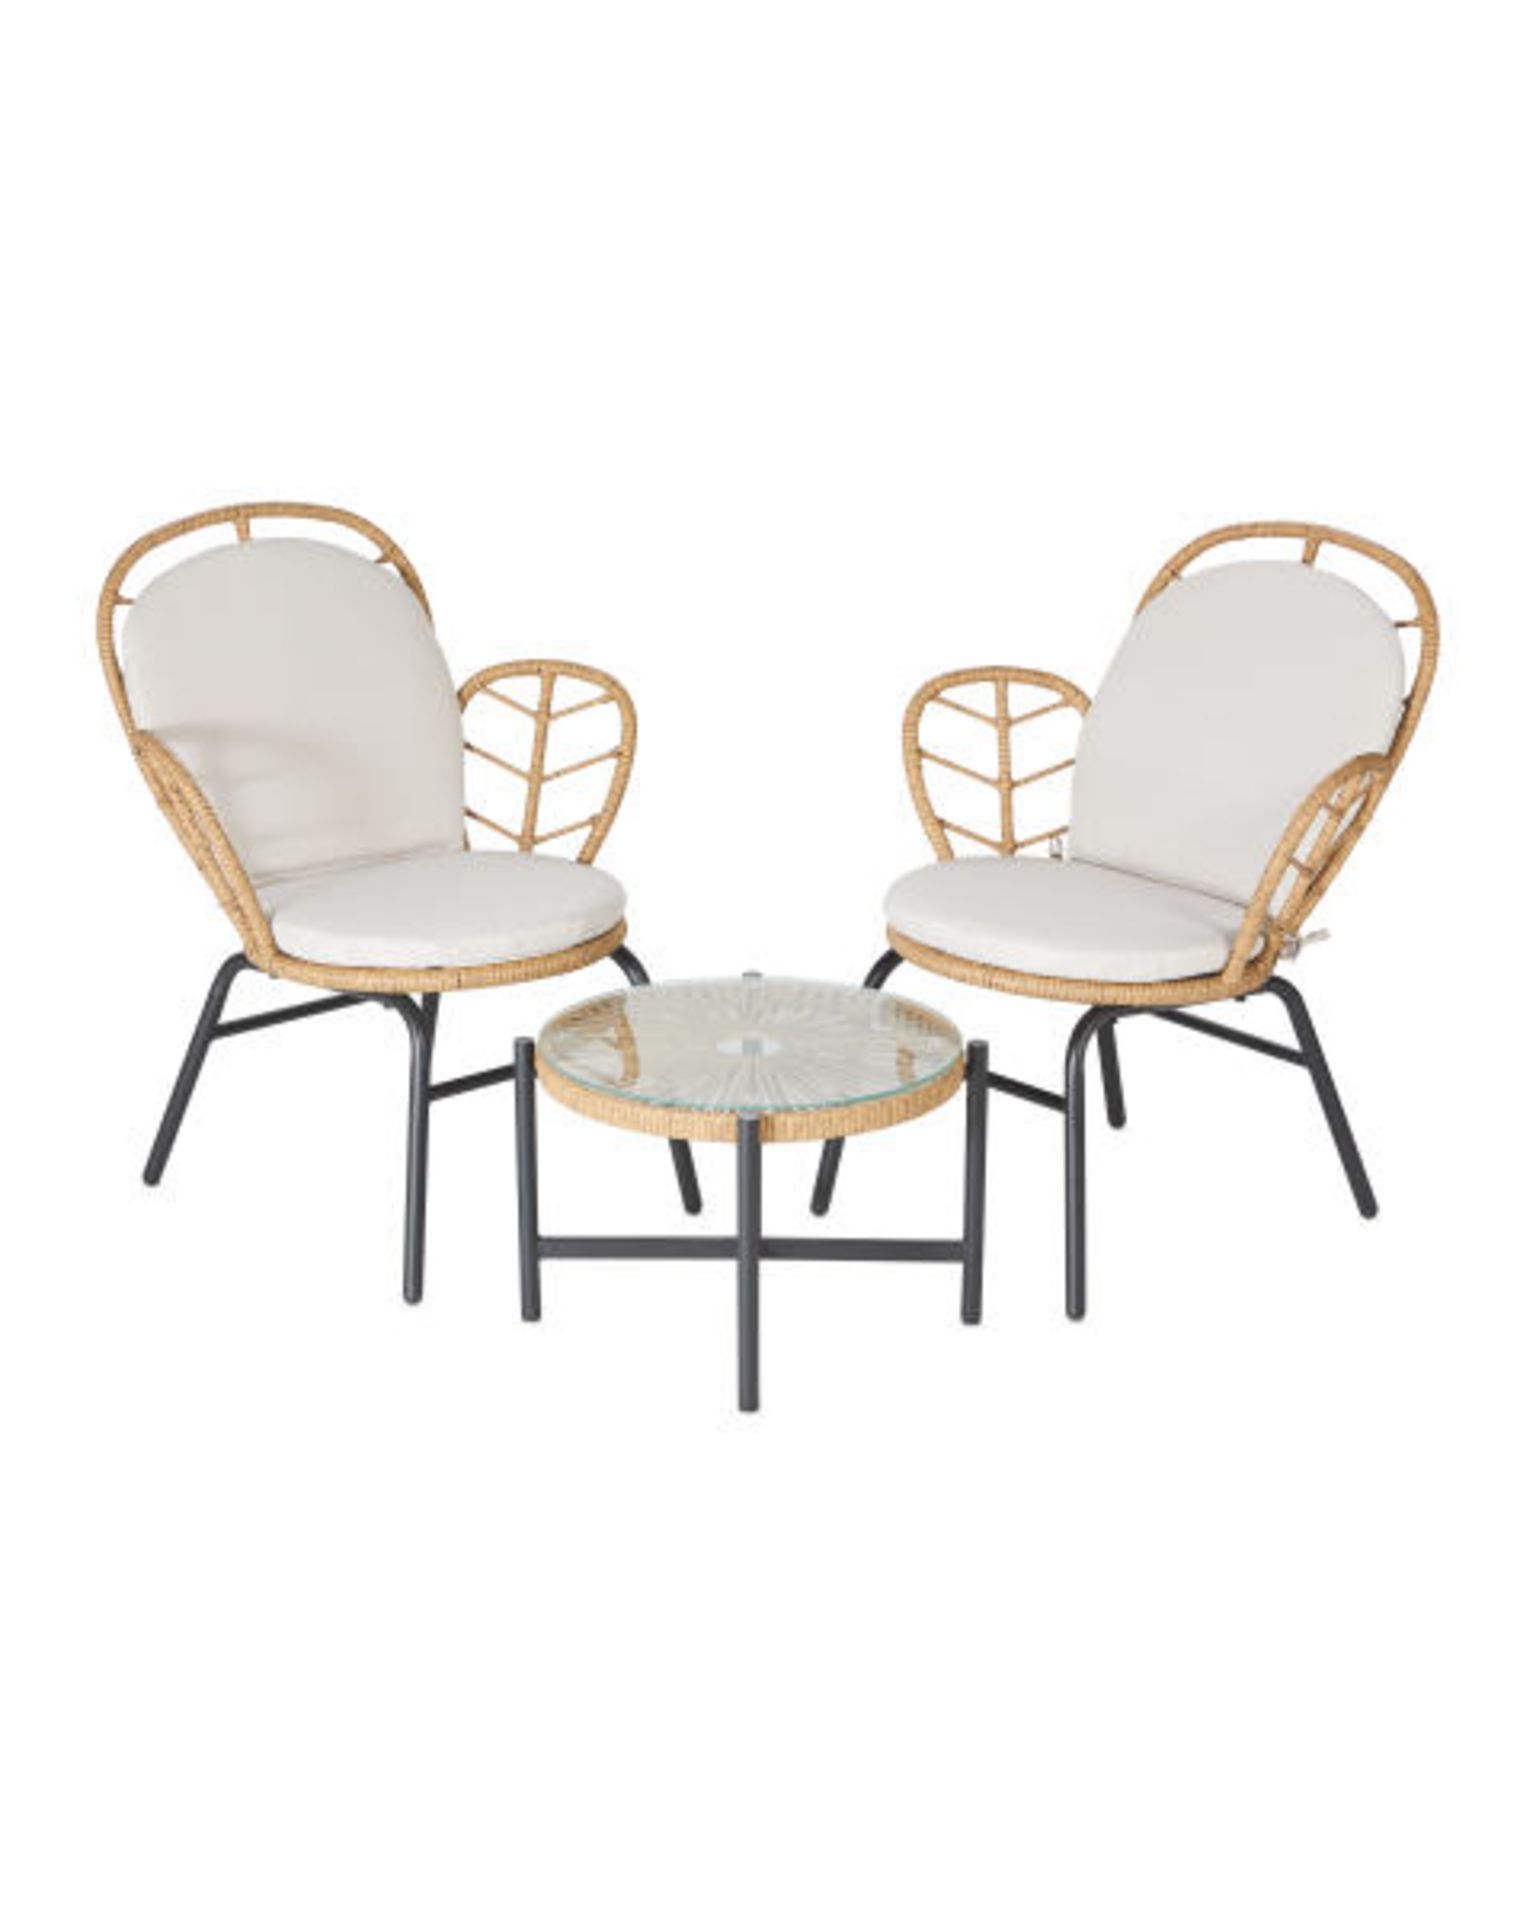 Luxury Petal Rattan Bistro Set. Transform your garden and create a space where you can relax with - Image 2 of 6